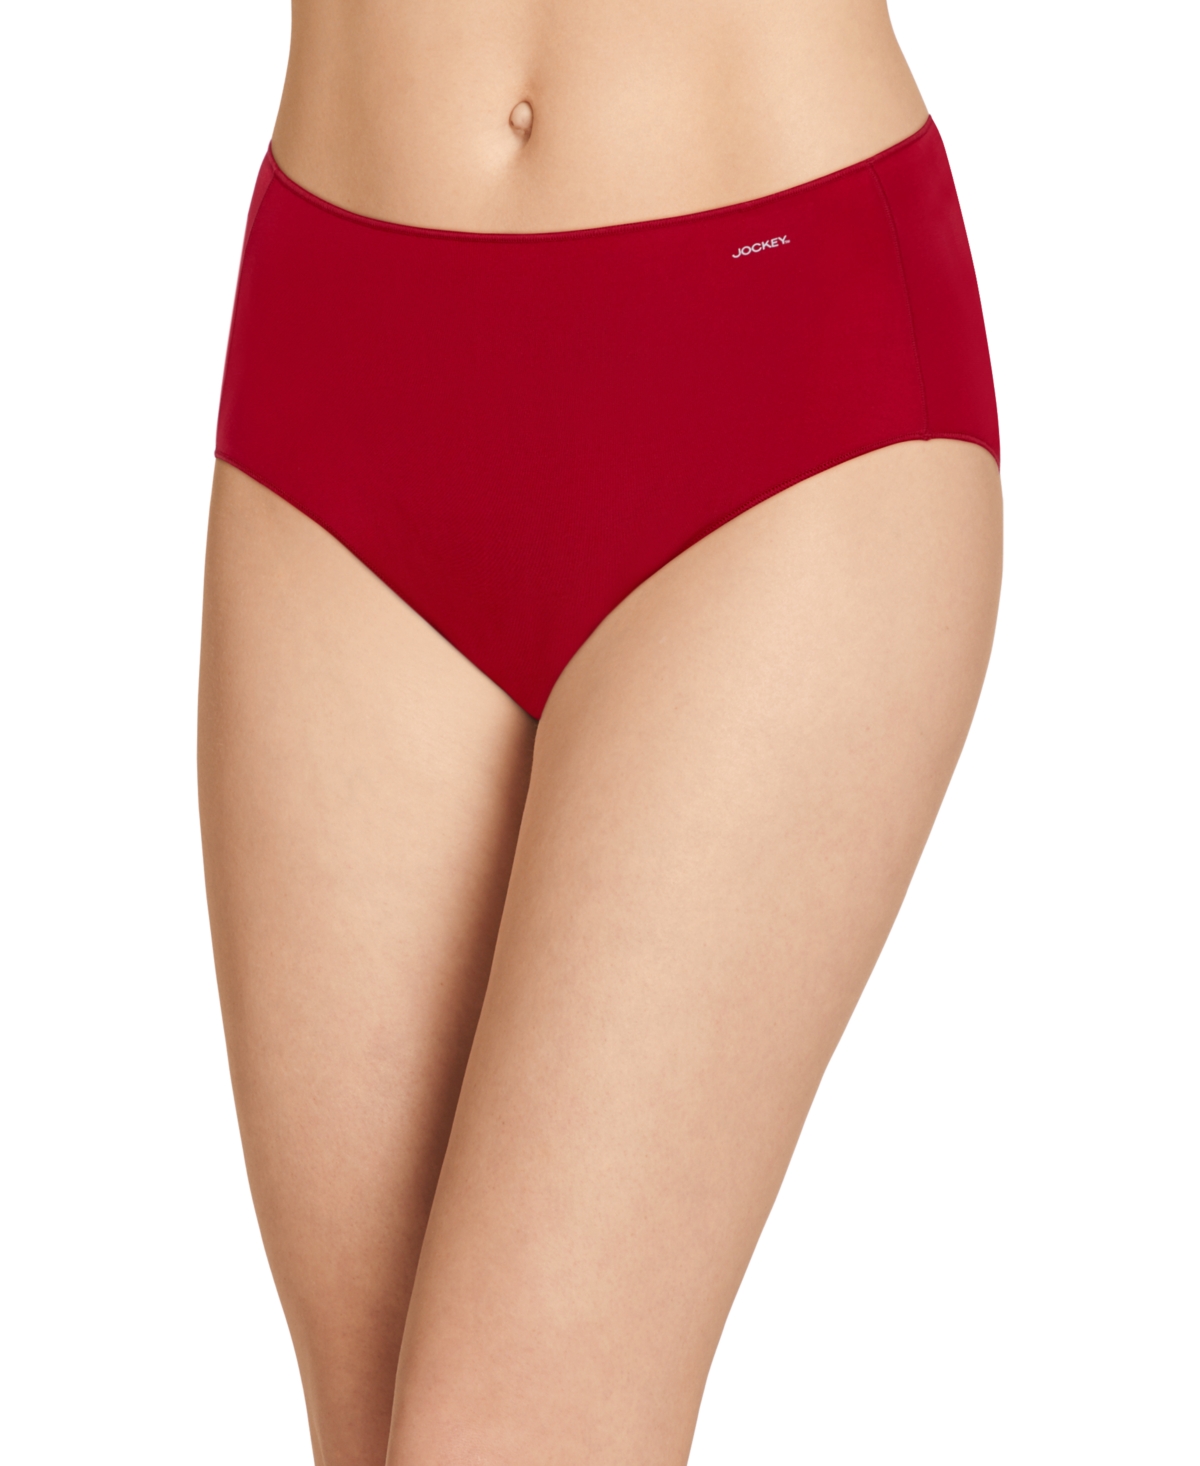 No Panty Line Promise Hip Brief Underwear 1372, Extended Sizes